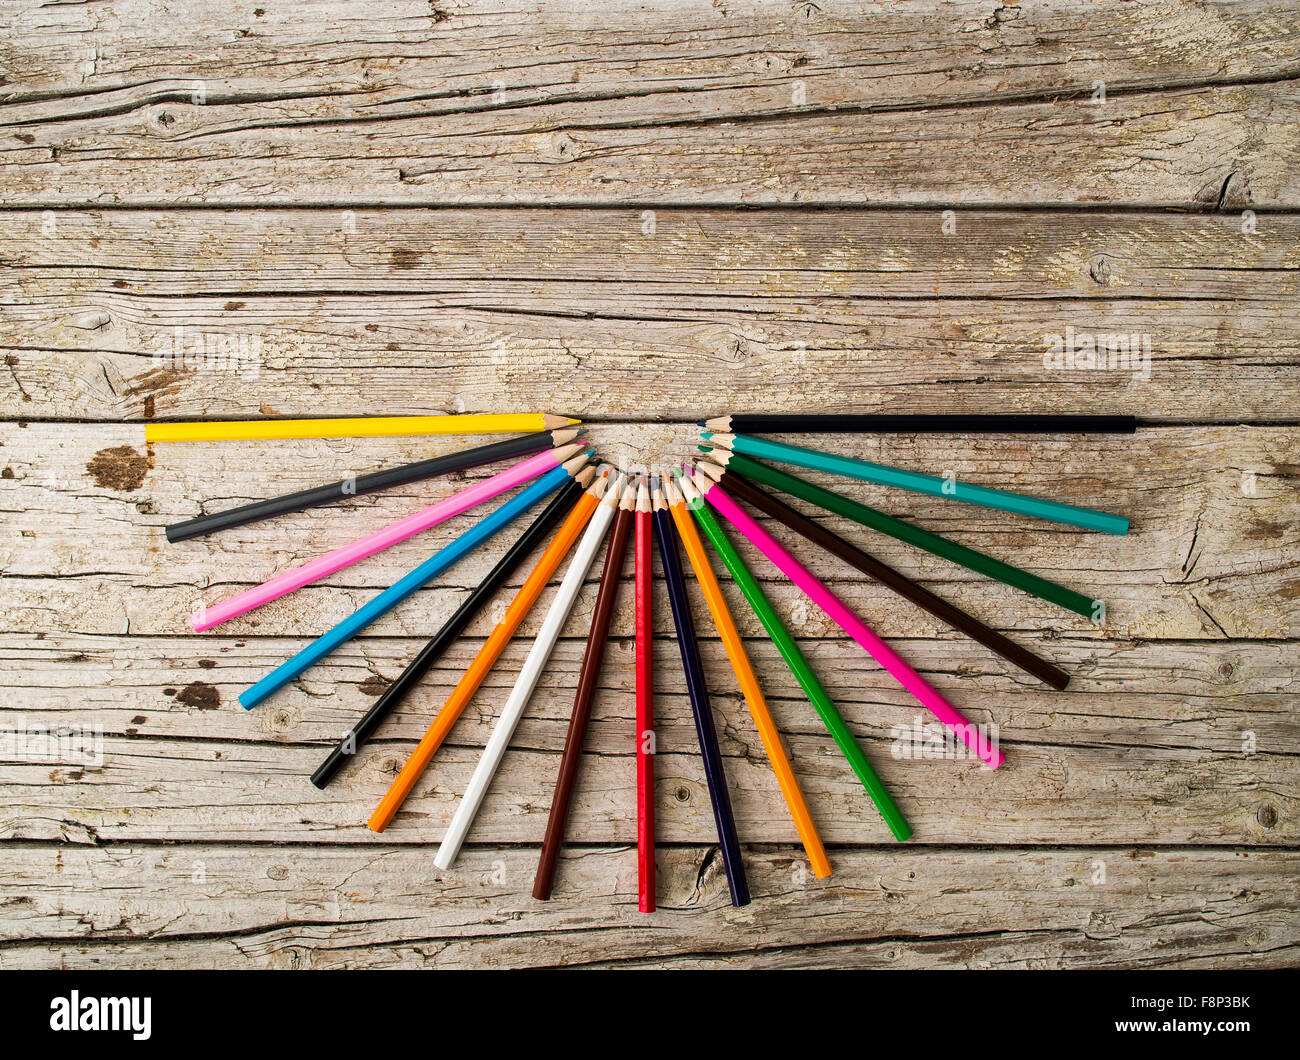 Colorful pencil crayons on wooden background Stock Photo